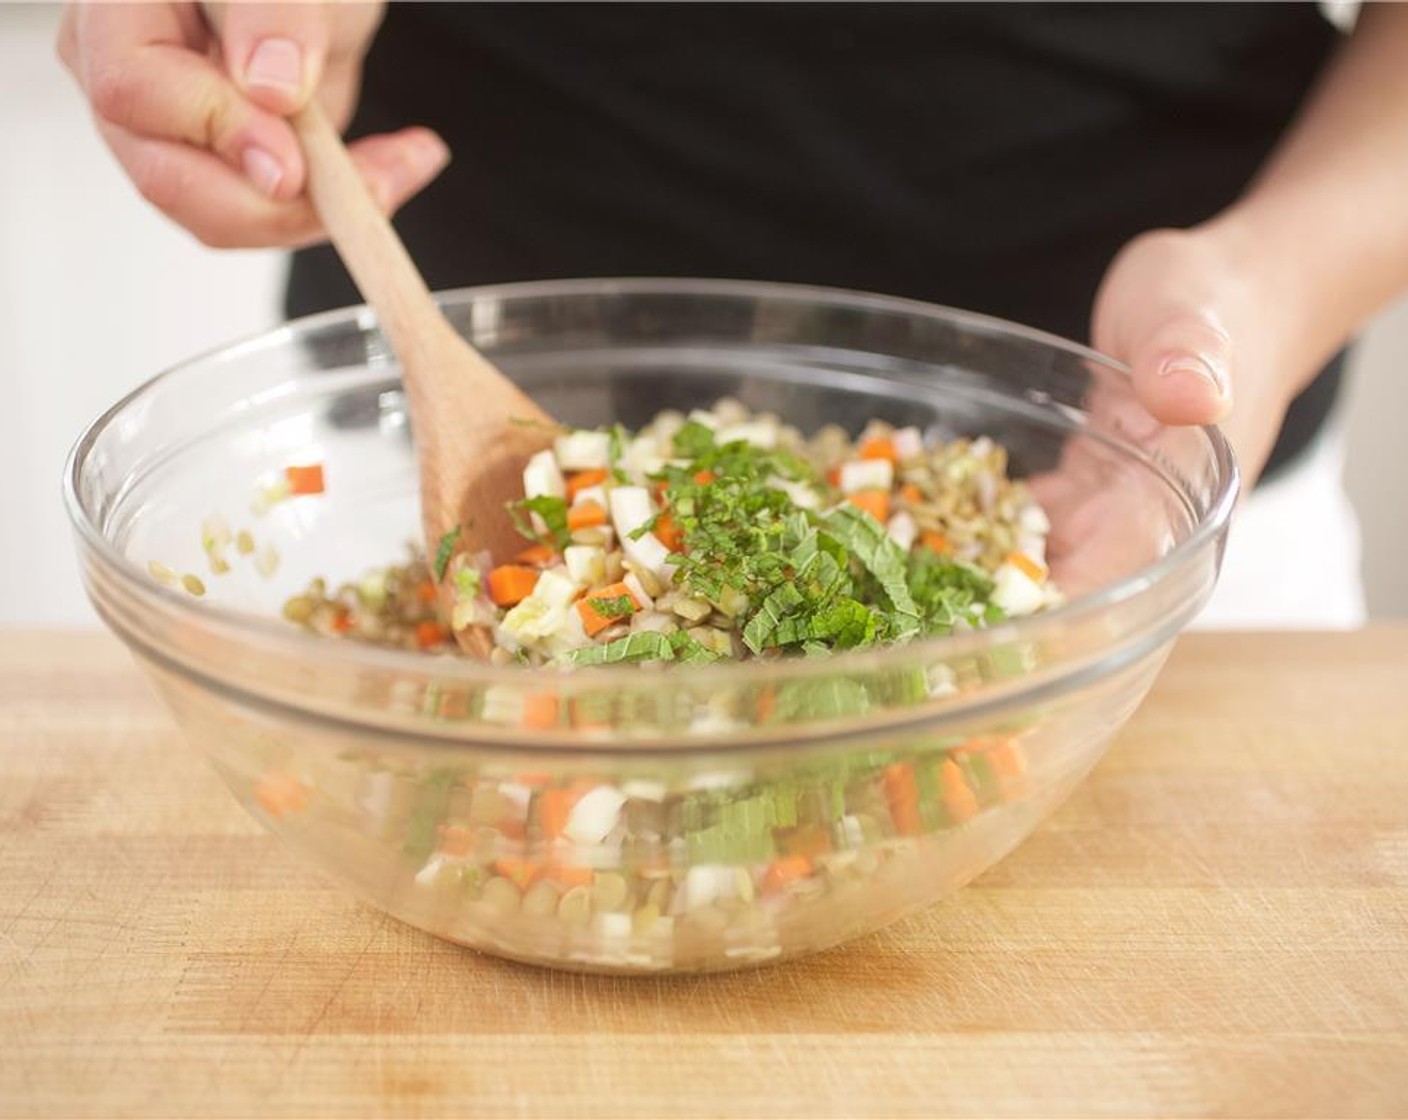 step 8 In a large bowl, toss together the lentils, fennel, carrots and shallots. Add the lemon vinaigrette, mint, and Salt (1/4 tsp) and Ground Black Pepper (1/4 tsp). Toss until fully incorporated. Crumble half of the Goat Cheese (2 Tbsp) over the lentil salad.